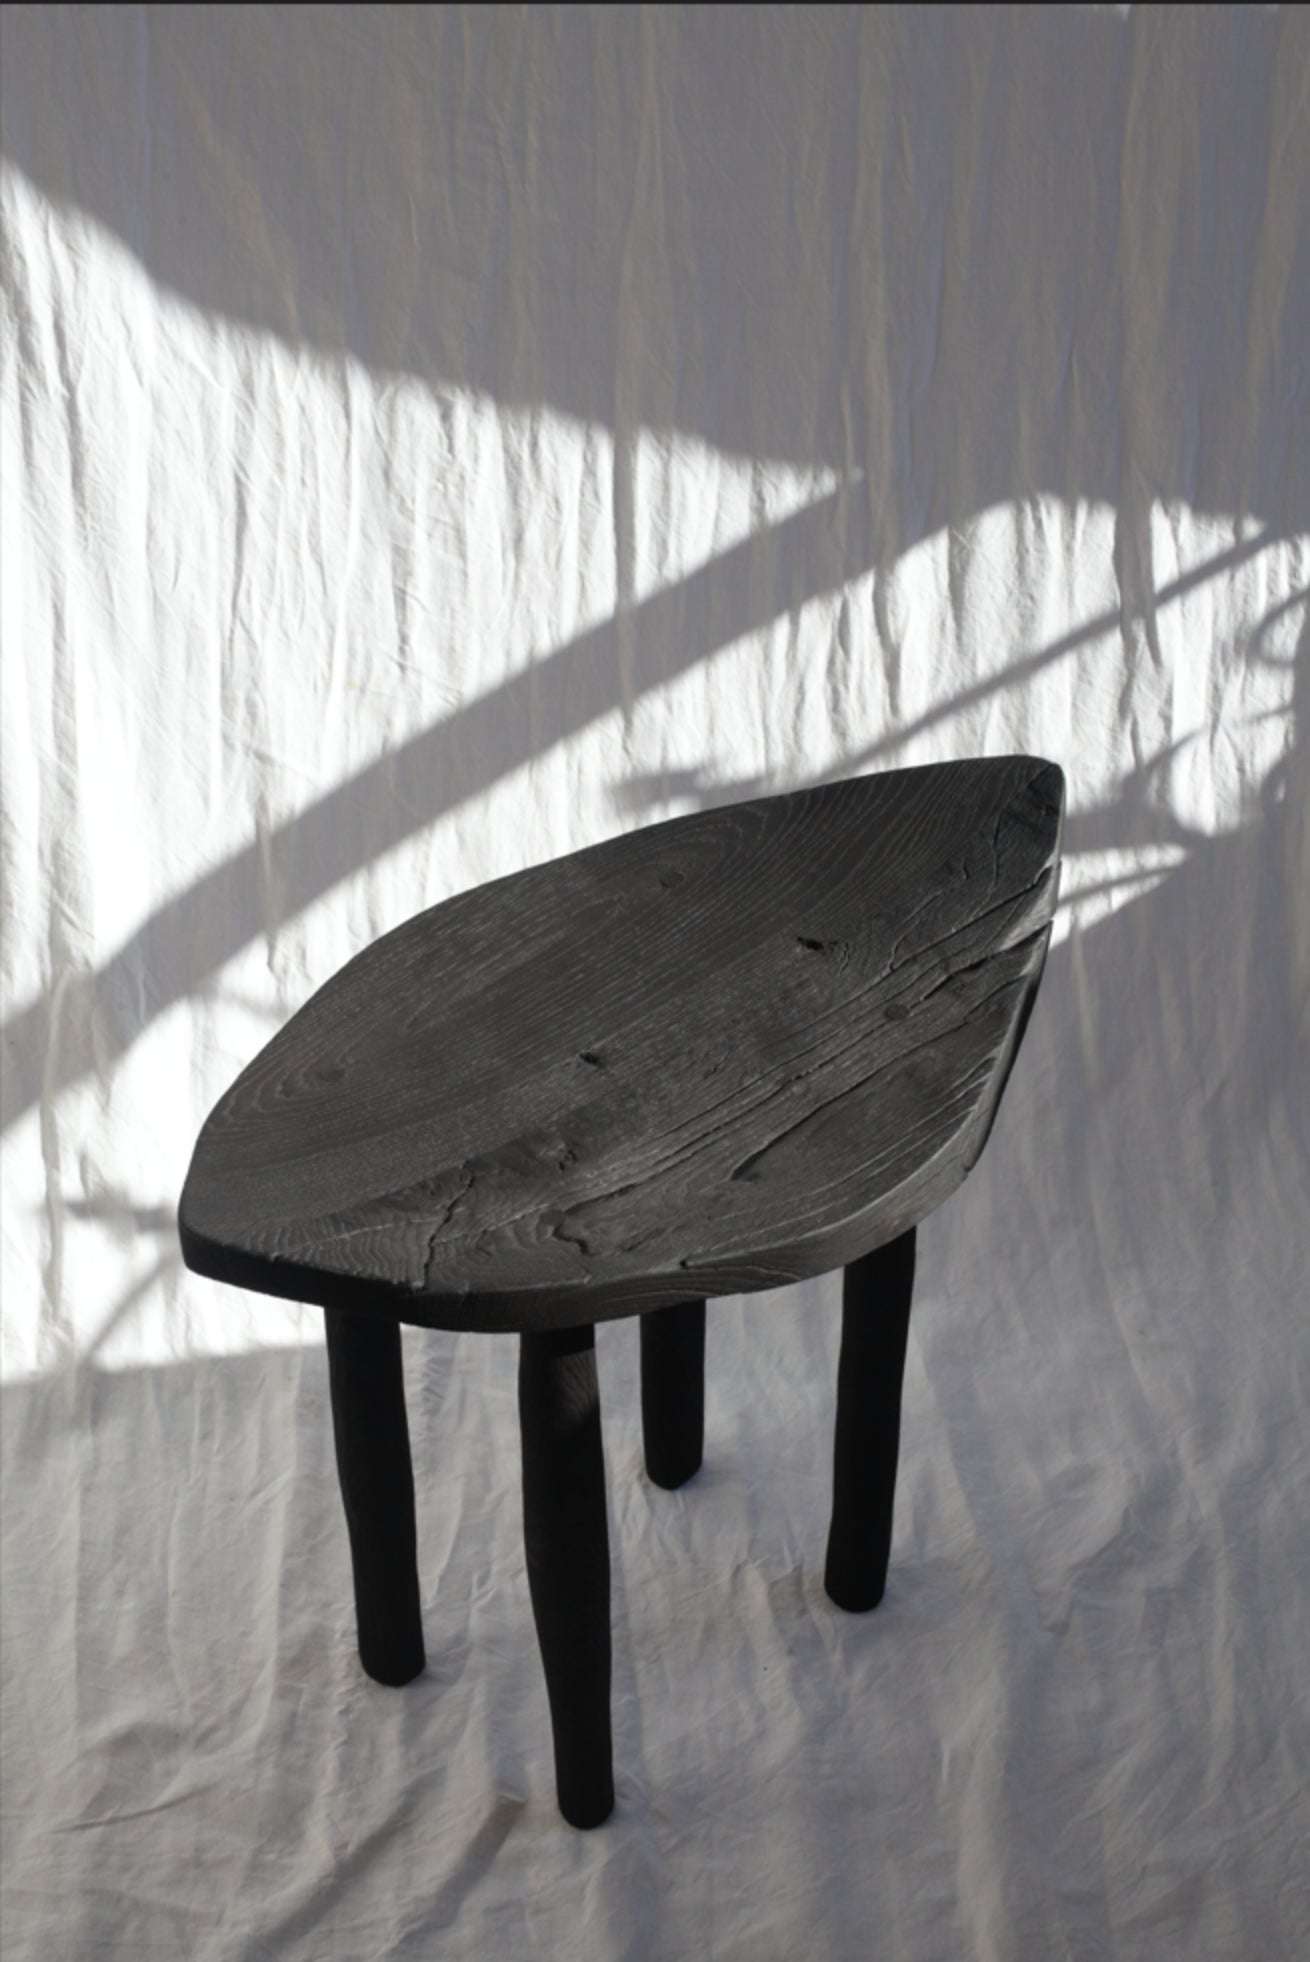 Stool Eclipse 3 by Antoine Maurice
Dimensions: W 40 x D 30 x H 50 cm
Materials: solid oak beams, assembled, carved and burned


Ethnic-inspired, the Eclipse range of furniture gives pride of place to primitive lines… as well as recycled